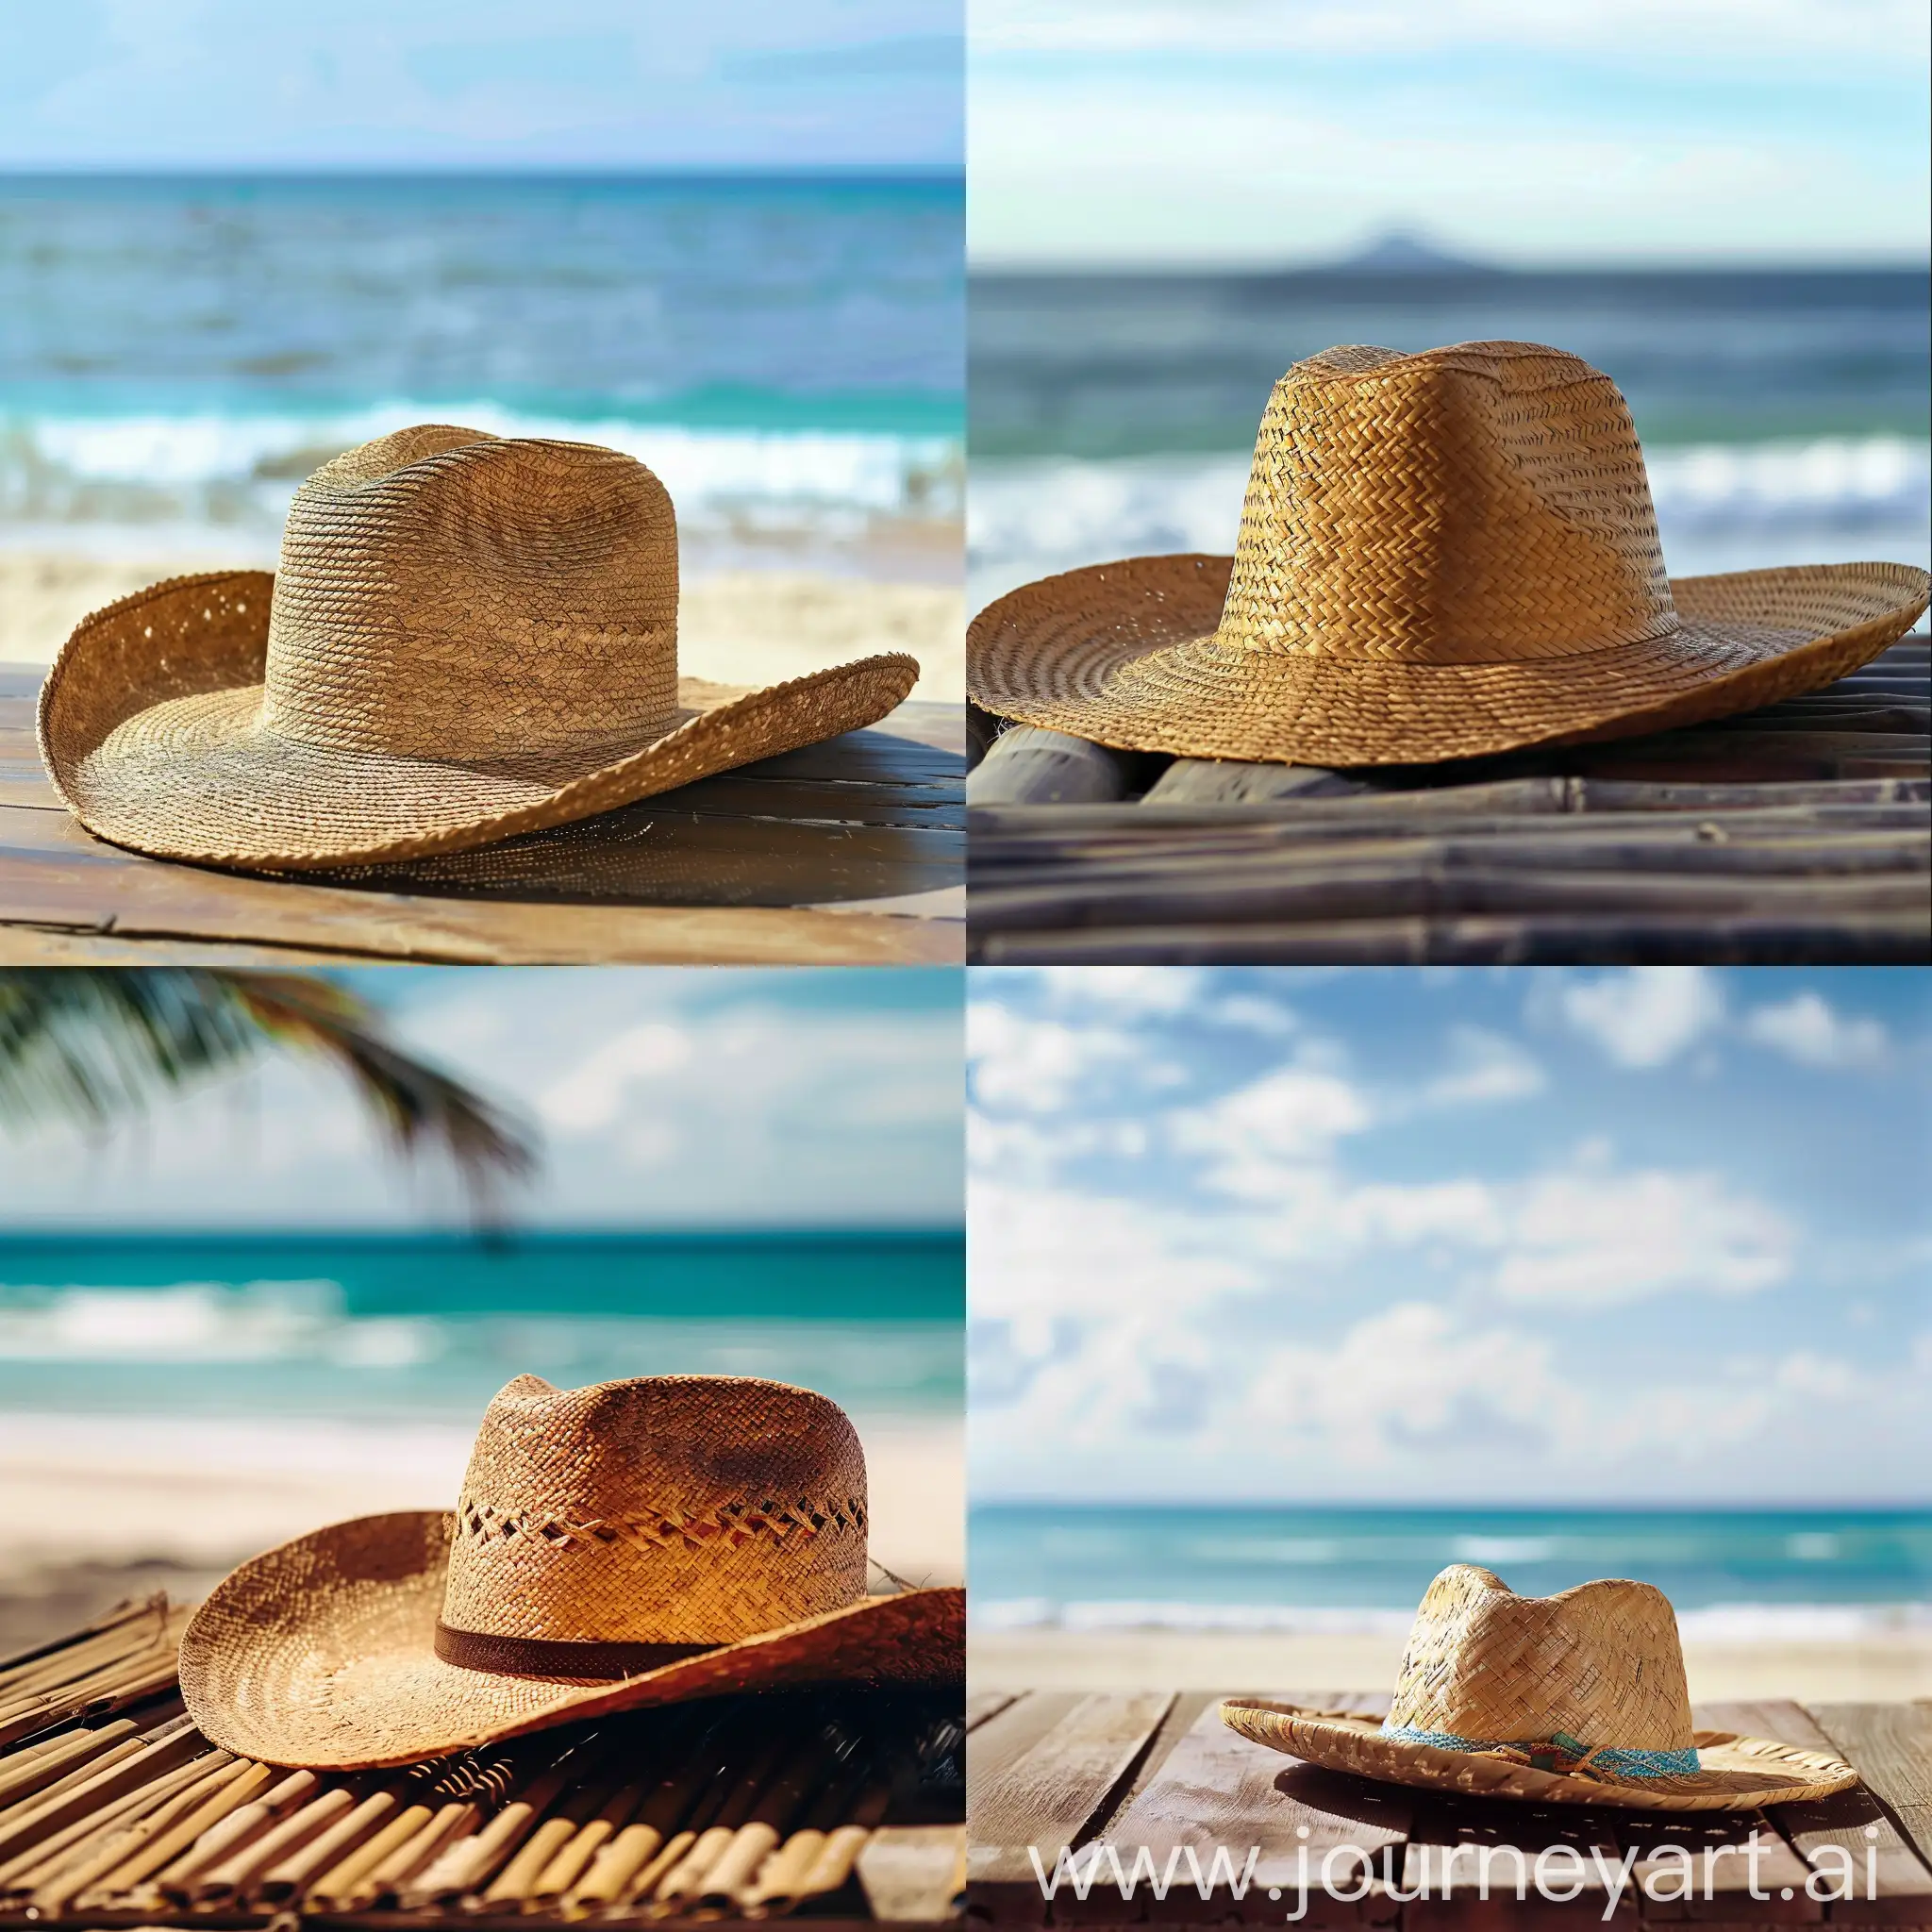 sombrero lies on the table against the background of the beach